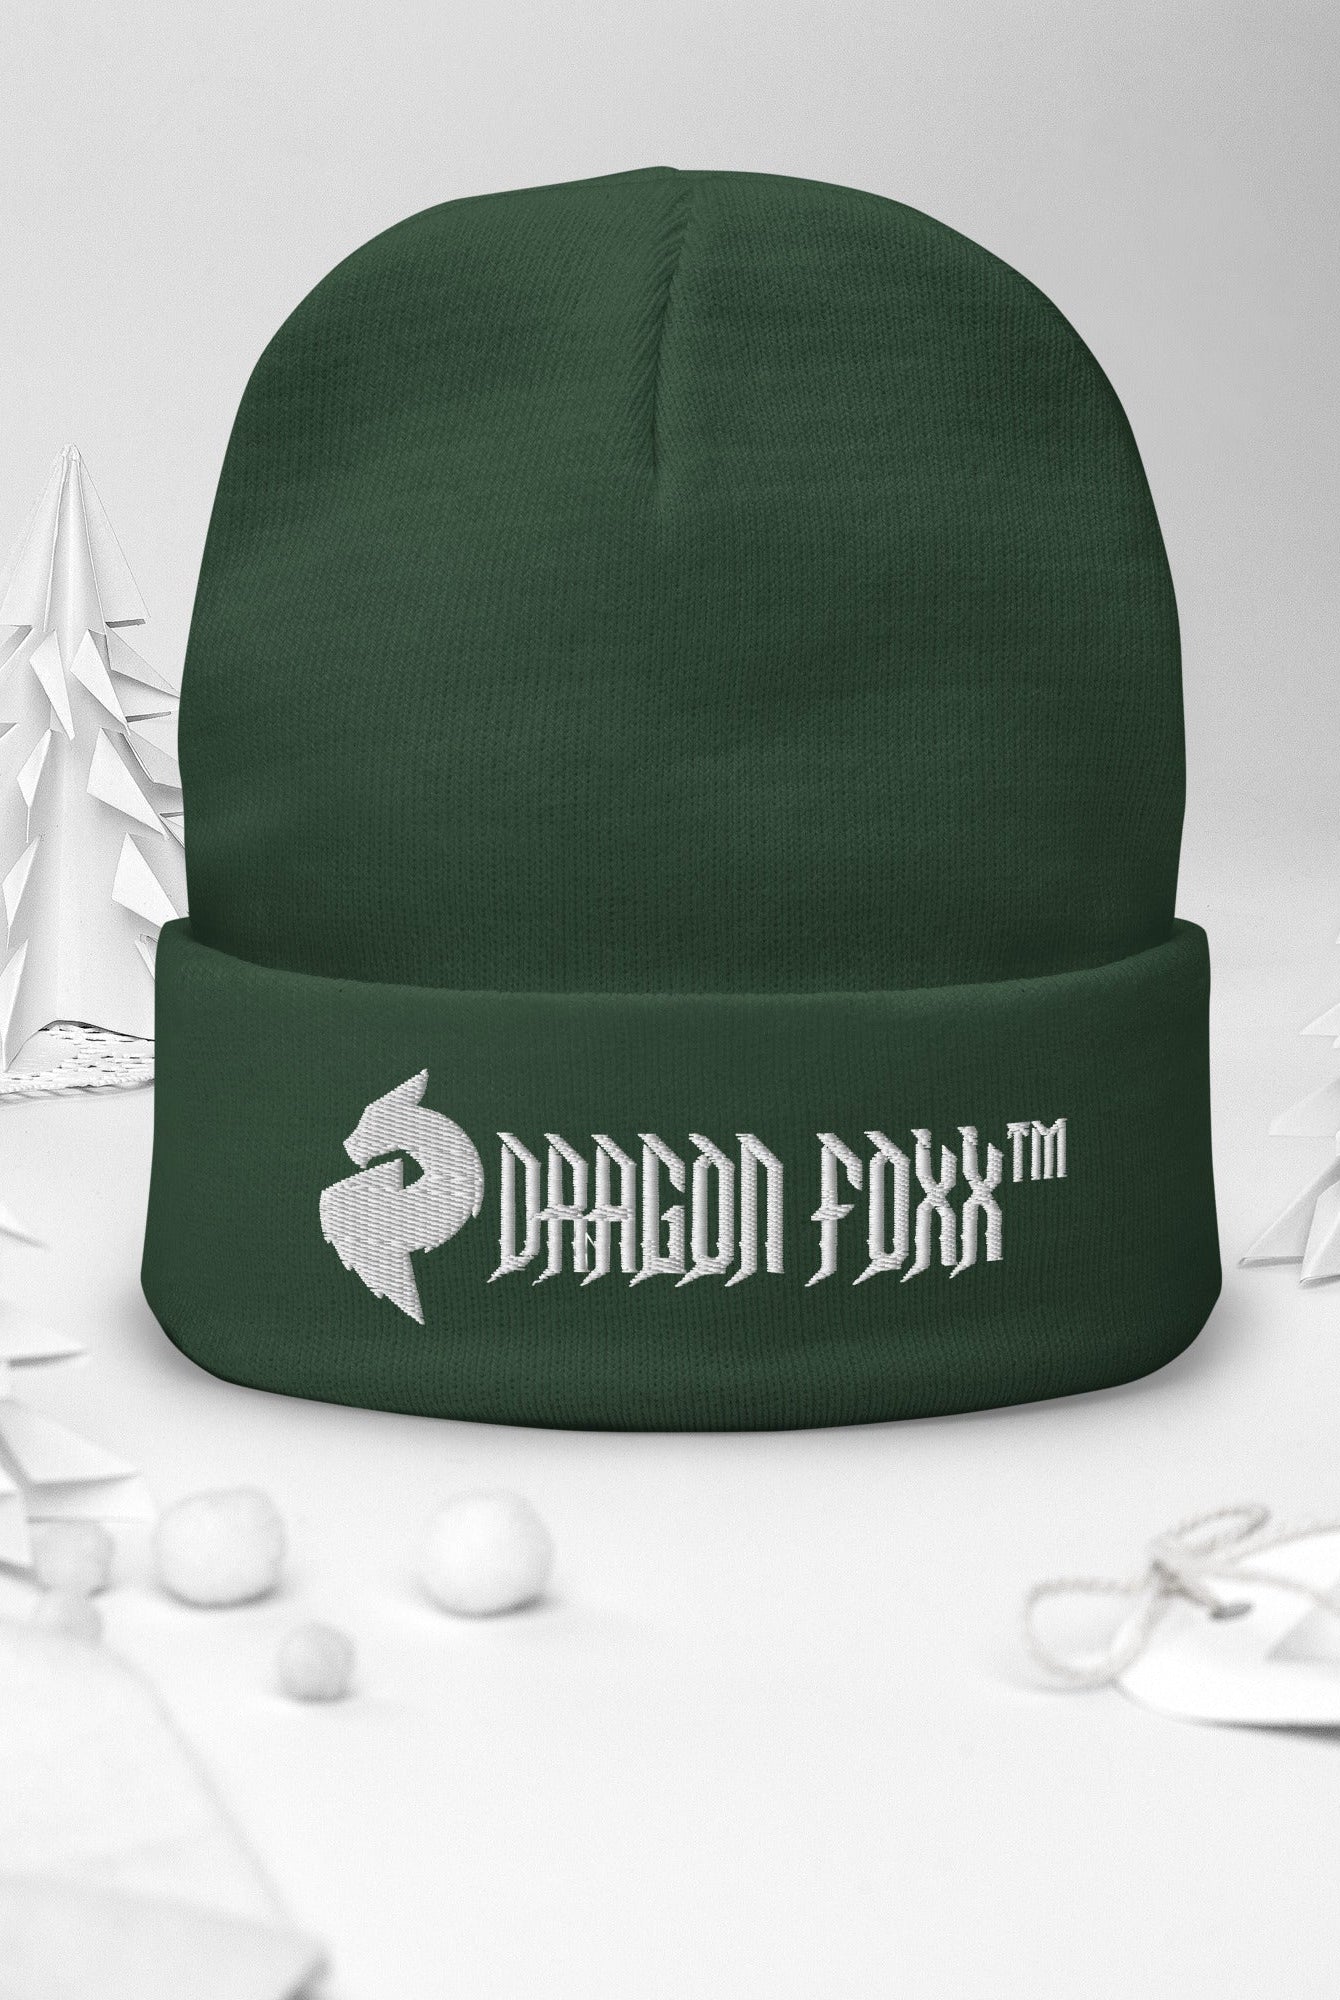 His or Hers Dragon Foxx™ Embroidered Beanie in 6 Colors - Dragon Foxx™ Embroidered Beanie - DRAGON FOXX™ - His or Hers Dragon Foxx™ Embroidered Beanie in 6 Colors - 9861092_4526 - Dark green - - Beanies - Black Beanie - Dark Green Beanie